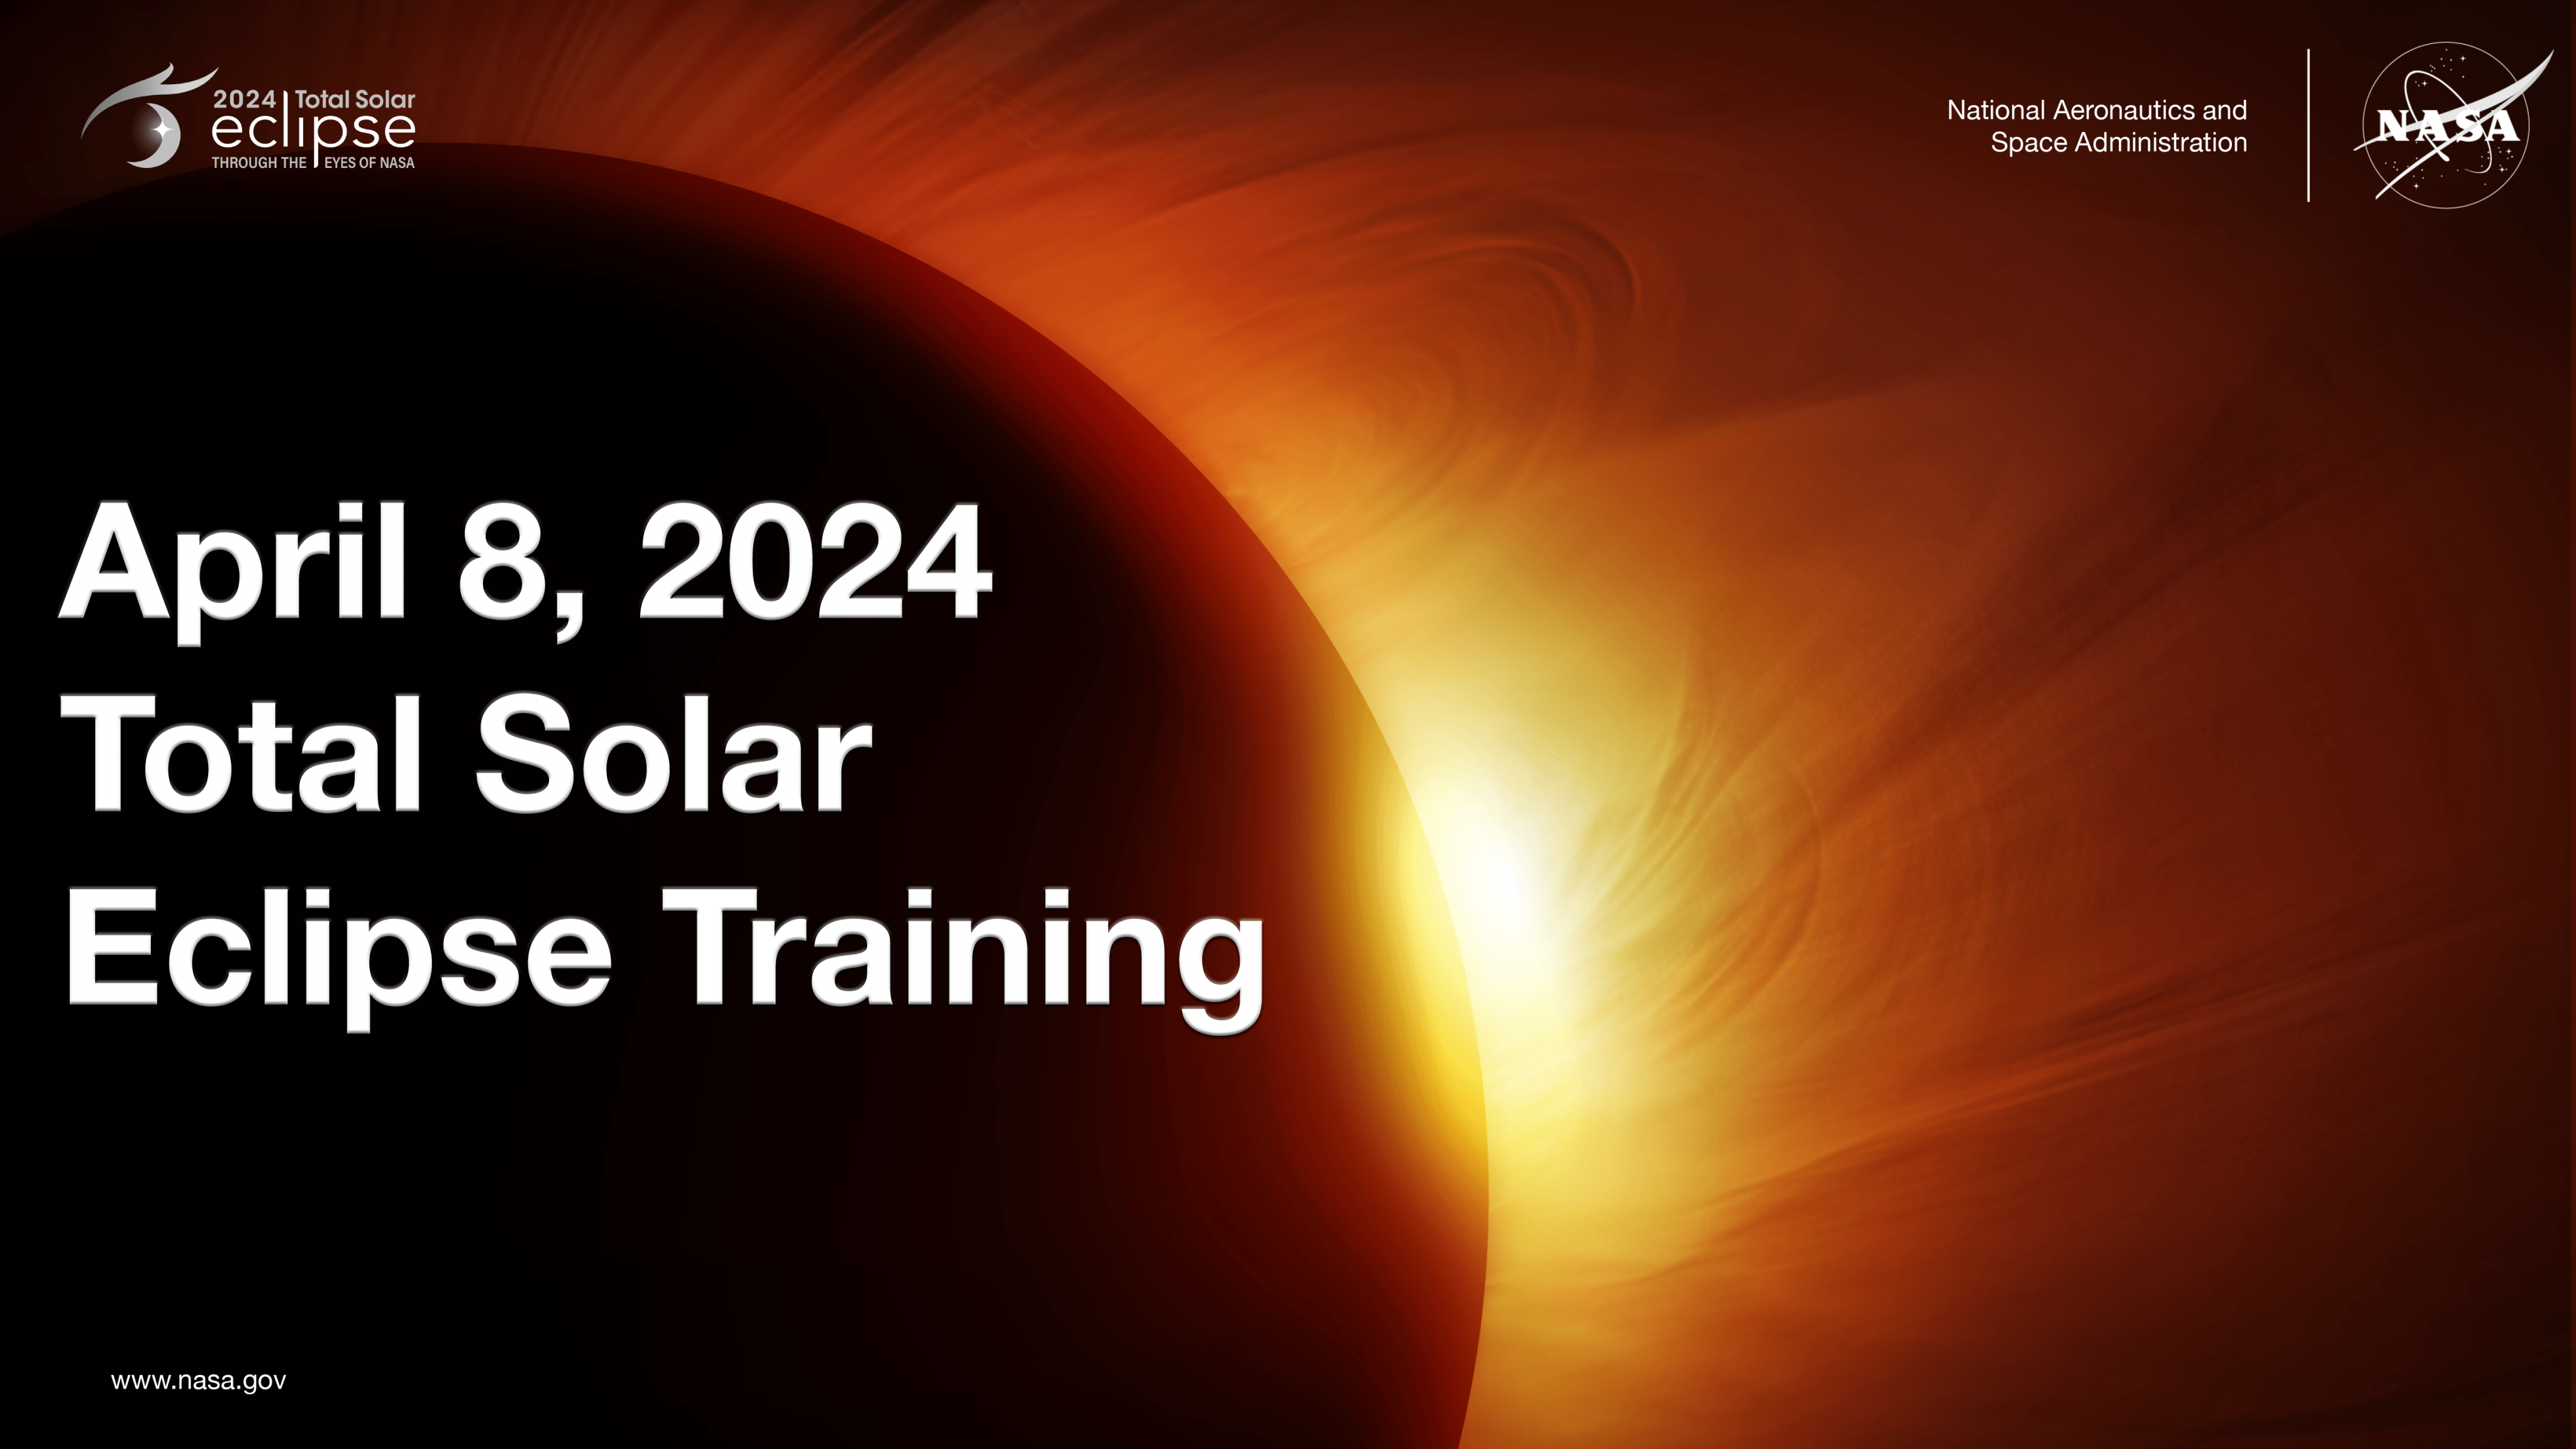 The top right quarter of the Moon blocking the Sun with yellow and orange light peeking out from behind the Moon with the title 'April 8, 2024 Total Solar Eclipse Training' overlaid in white on the Moon